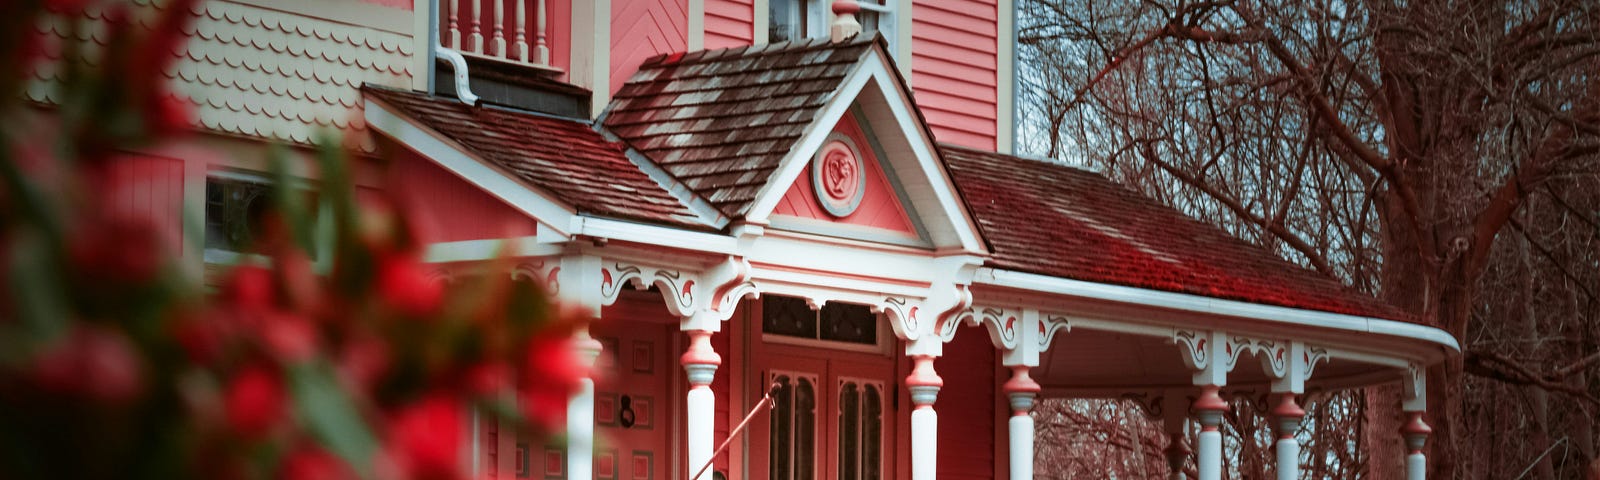 Pink Victorian home with large porch and red bushes.